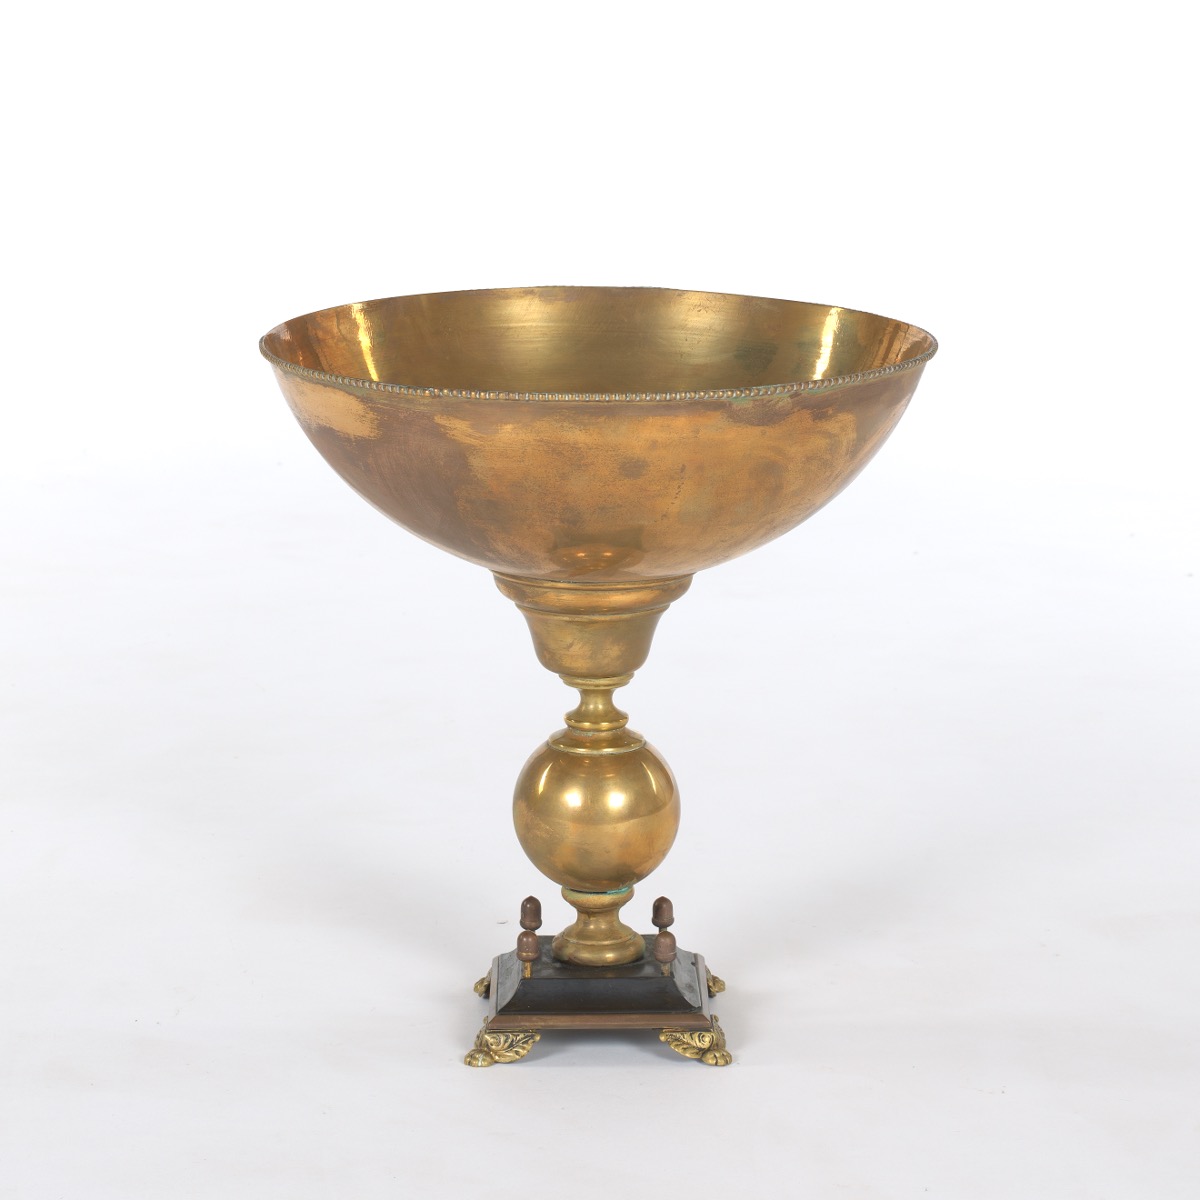 French Patinated Brass and Black Slate Centerpiece Bowl, ca. 19th Century - Image 5 of 7